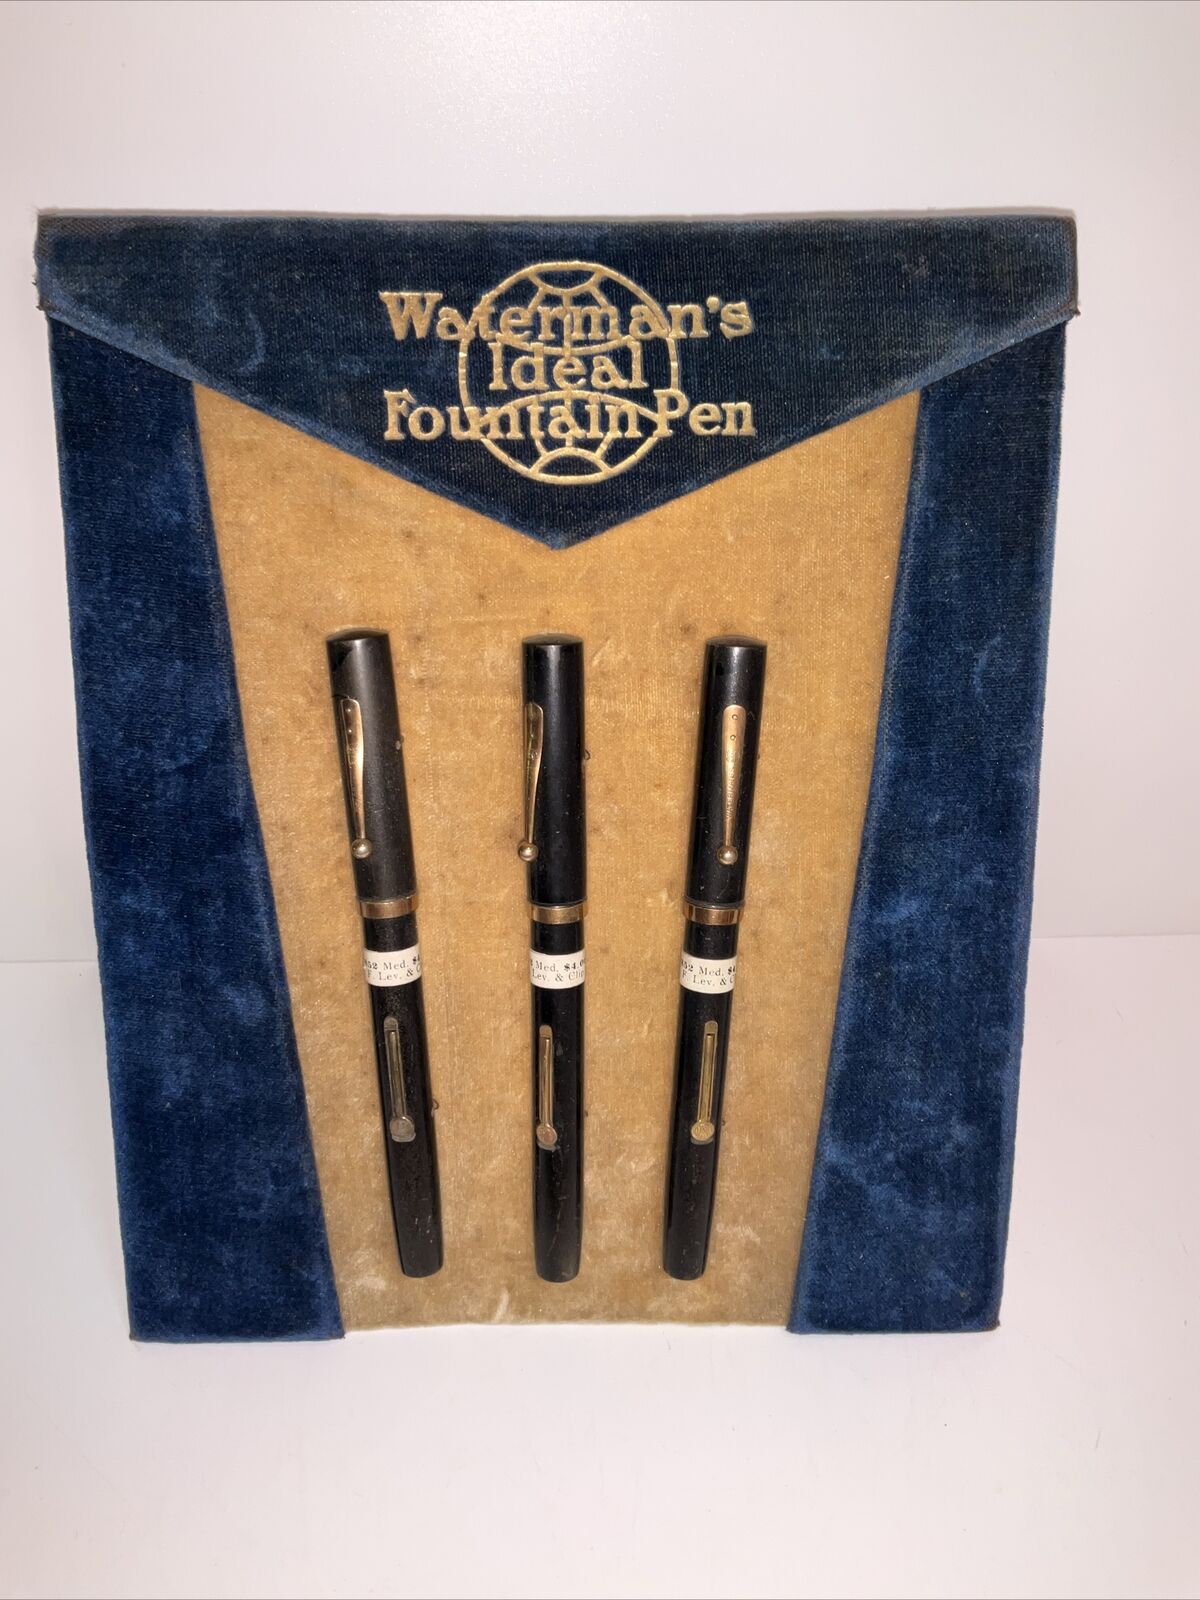 Very Rare Antique Original Waterman Store Display With 3 Dummy Pens 